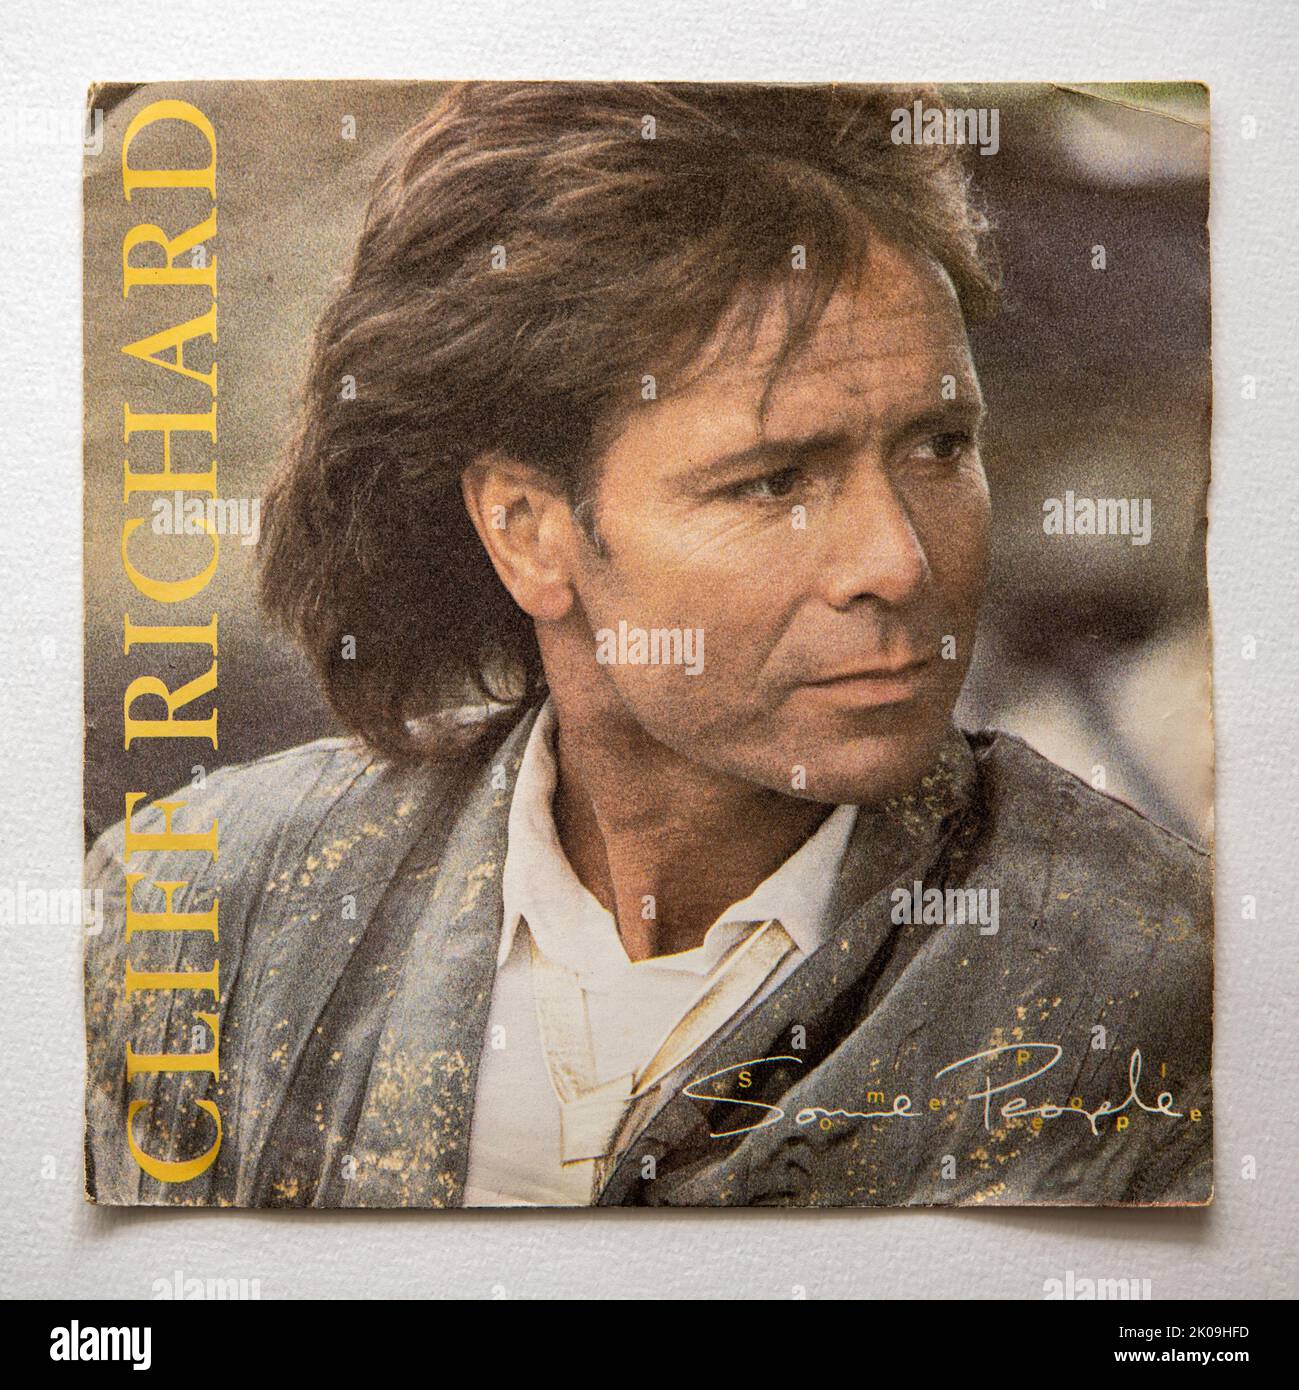 Picture cover of the seven inch single version of Some People by Cliff Richard, which was released in 1987. Stock Photo